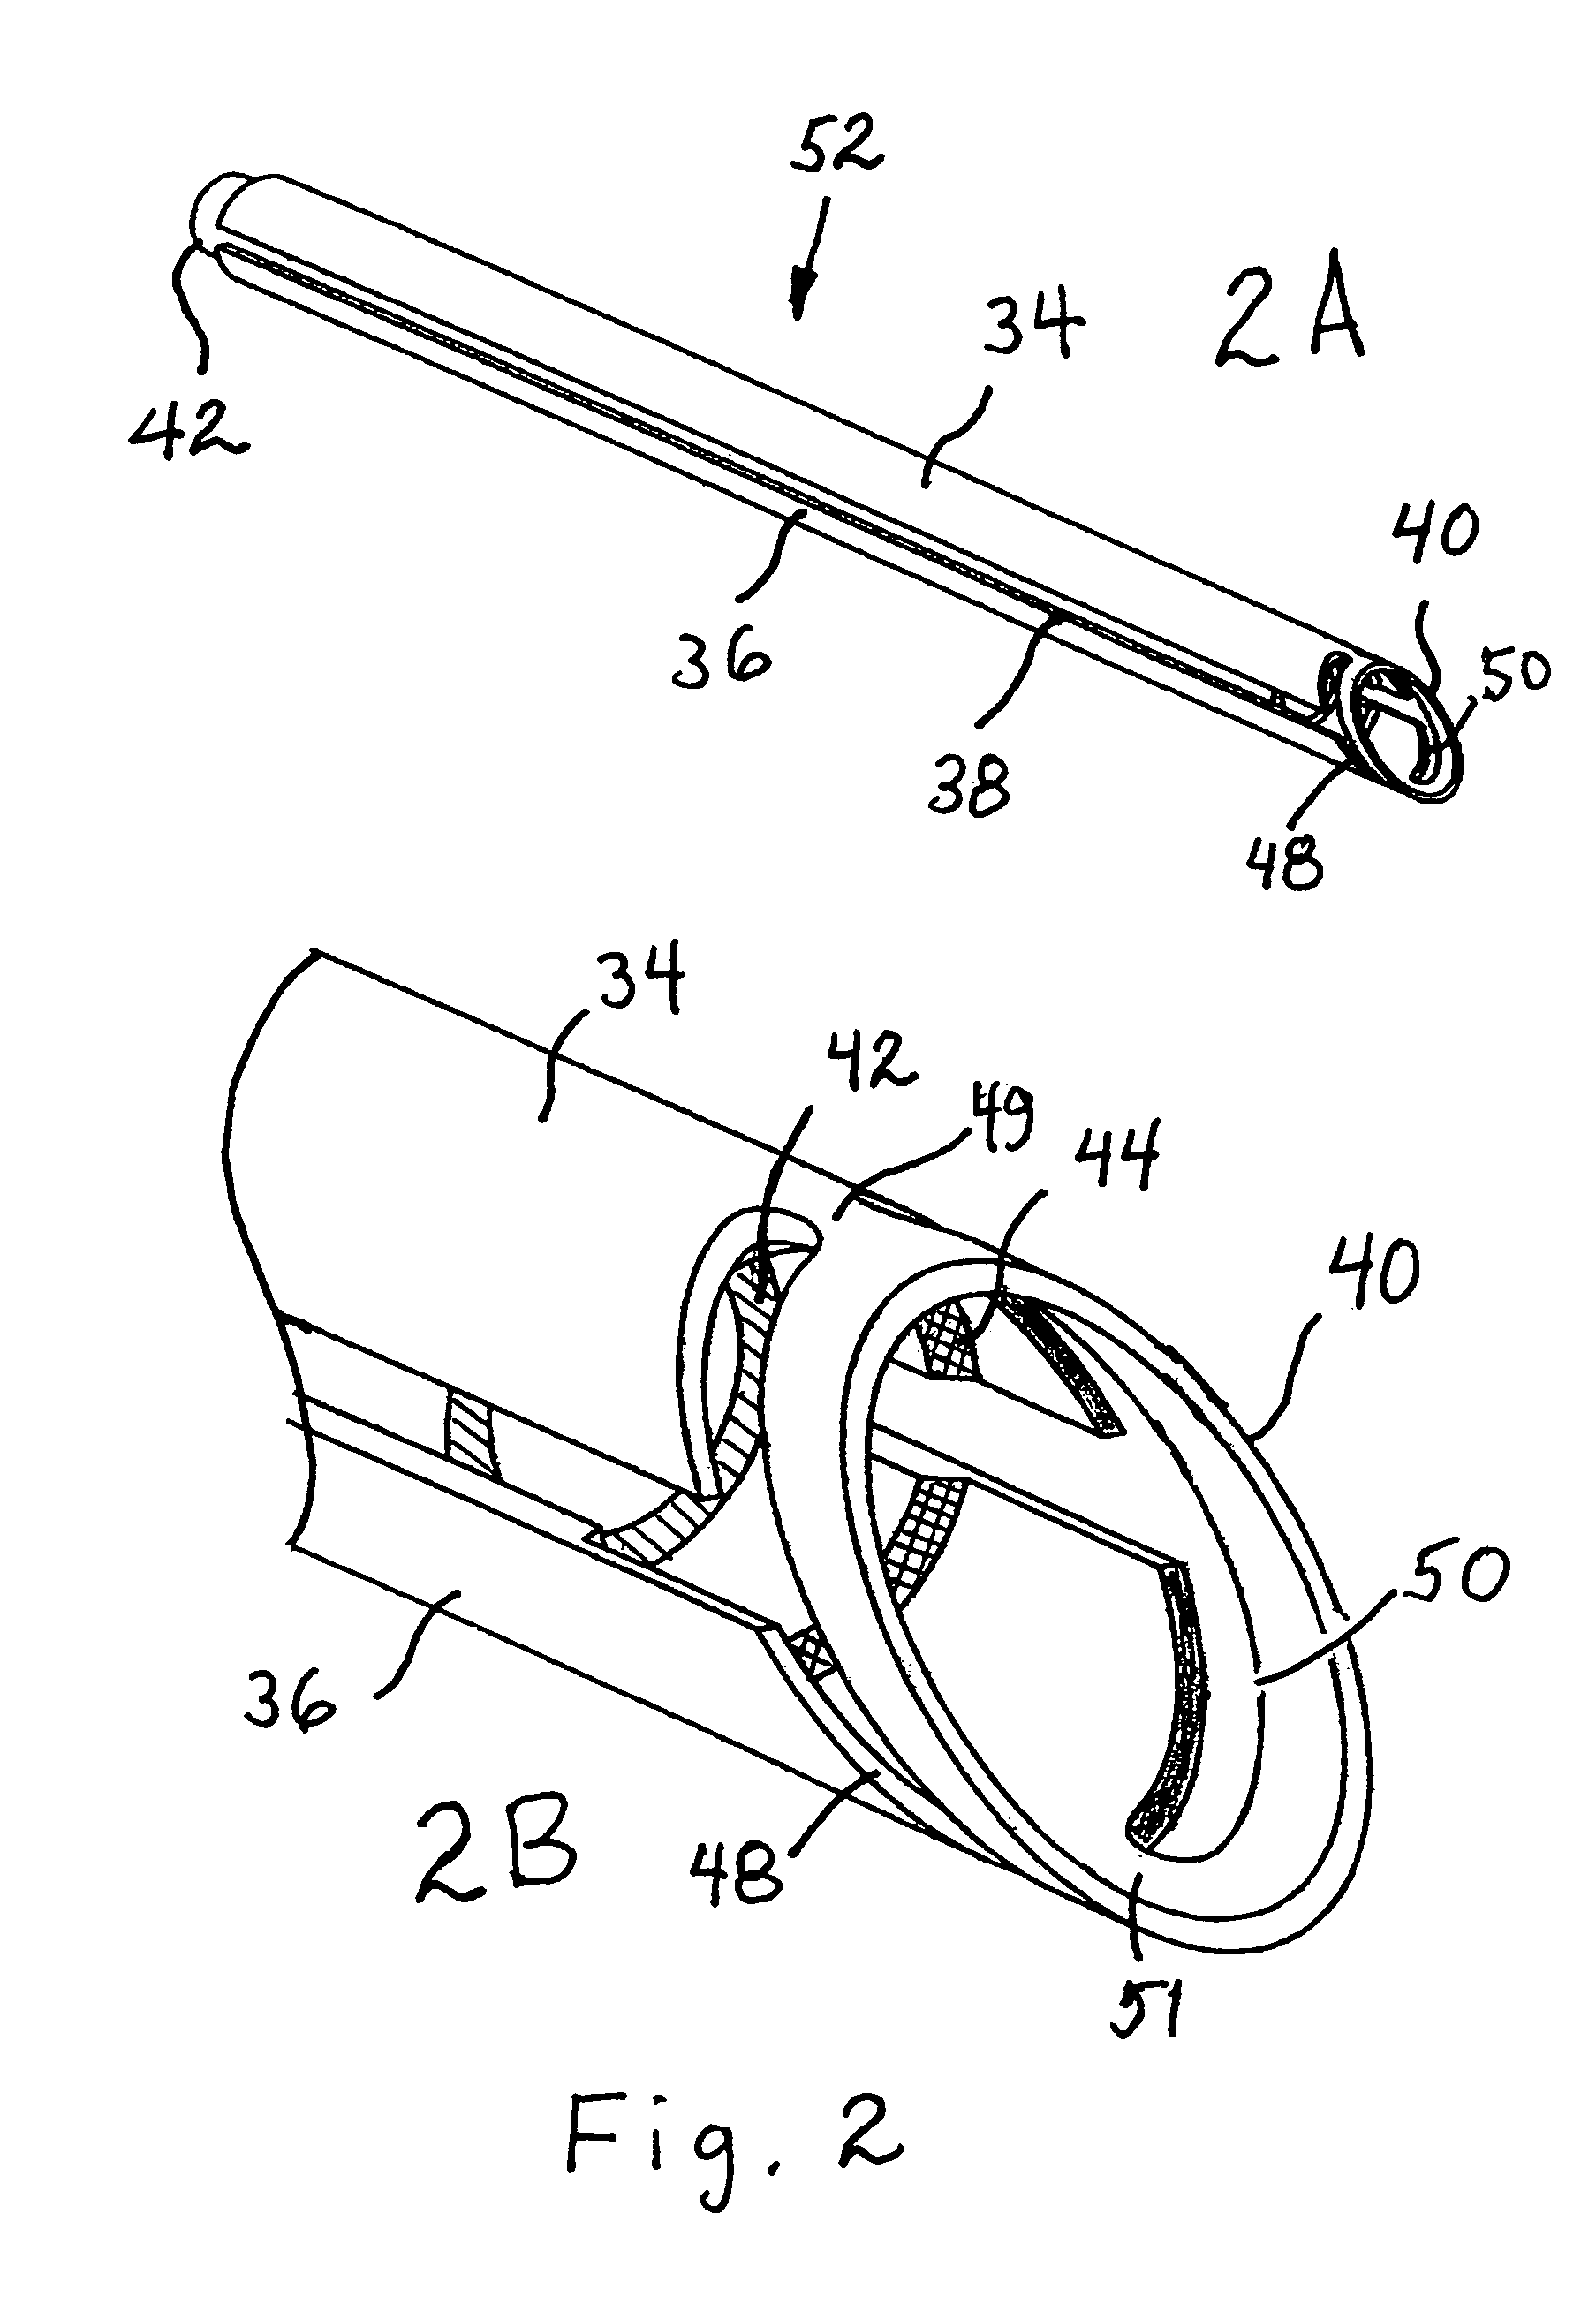 Thermal airflow tool and system